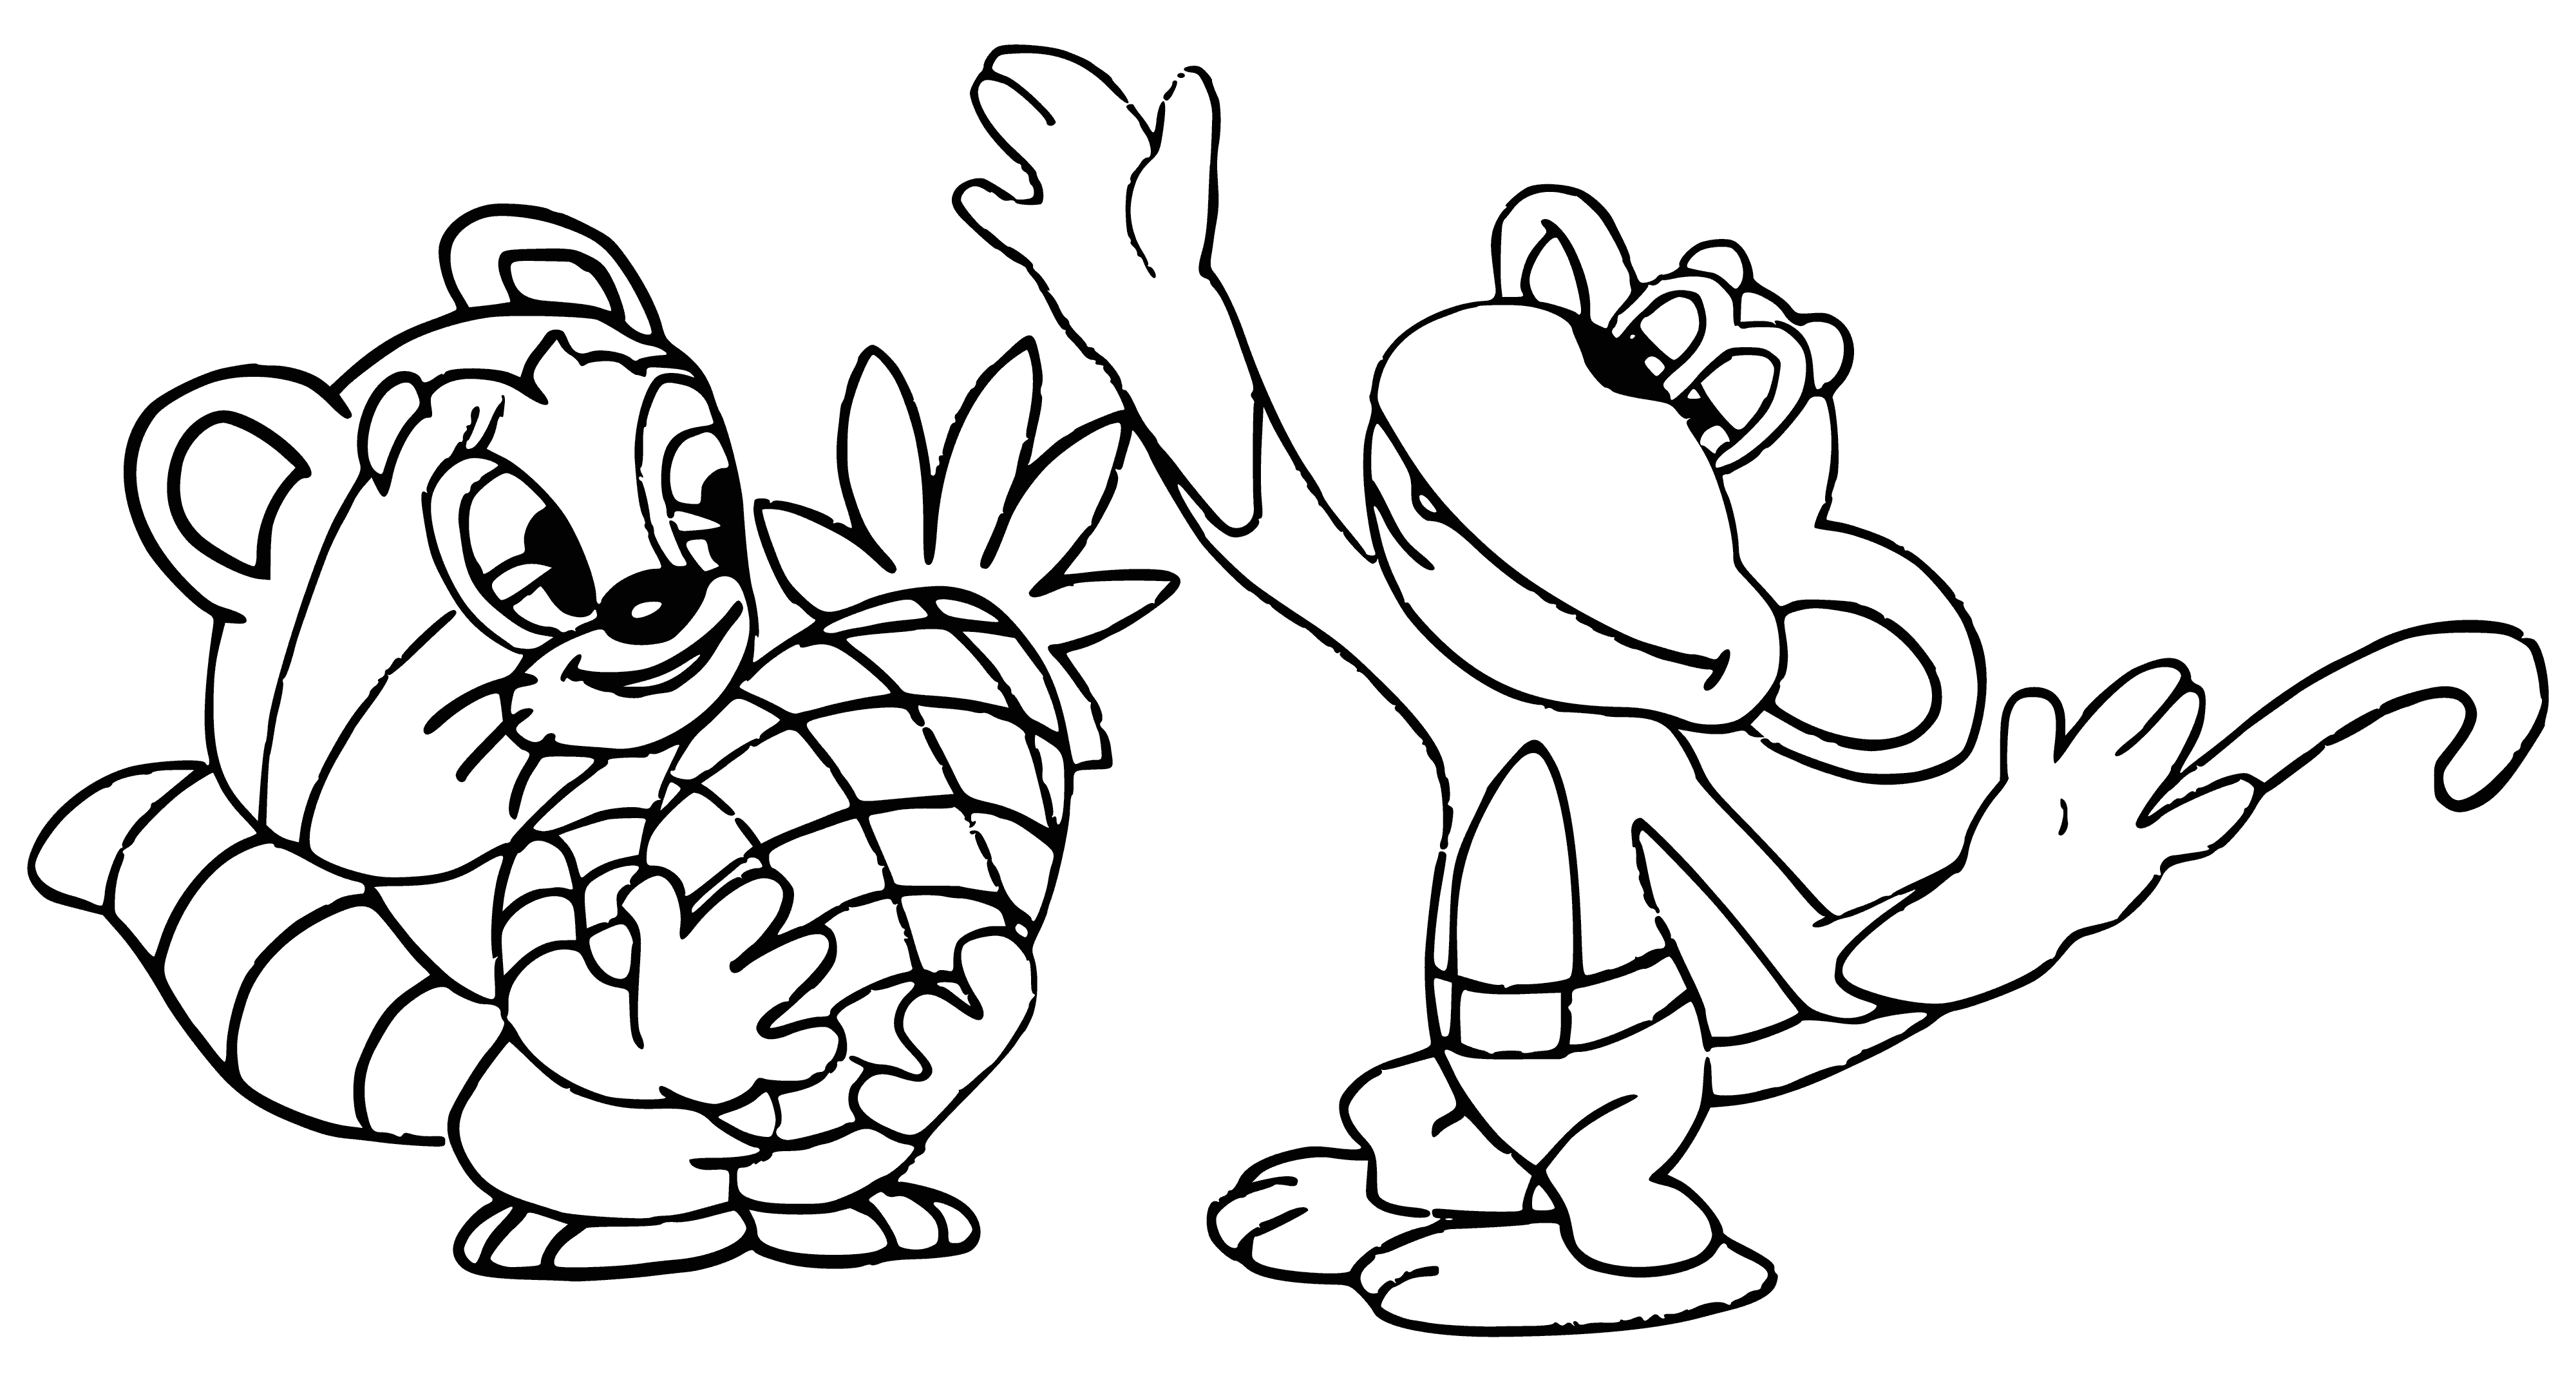 coloring page: Raccoon stands on monkey's head hugging its head; raccoon's tail wrapped around monkey's body.